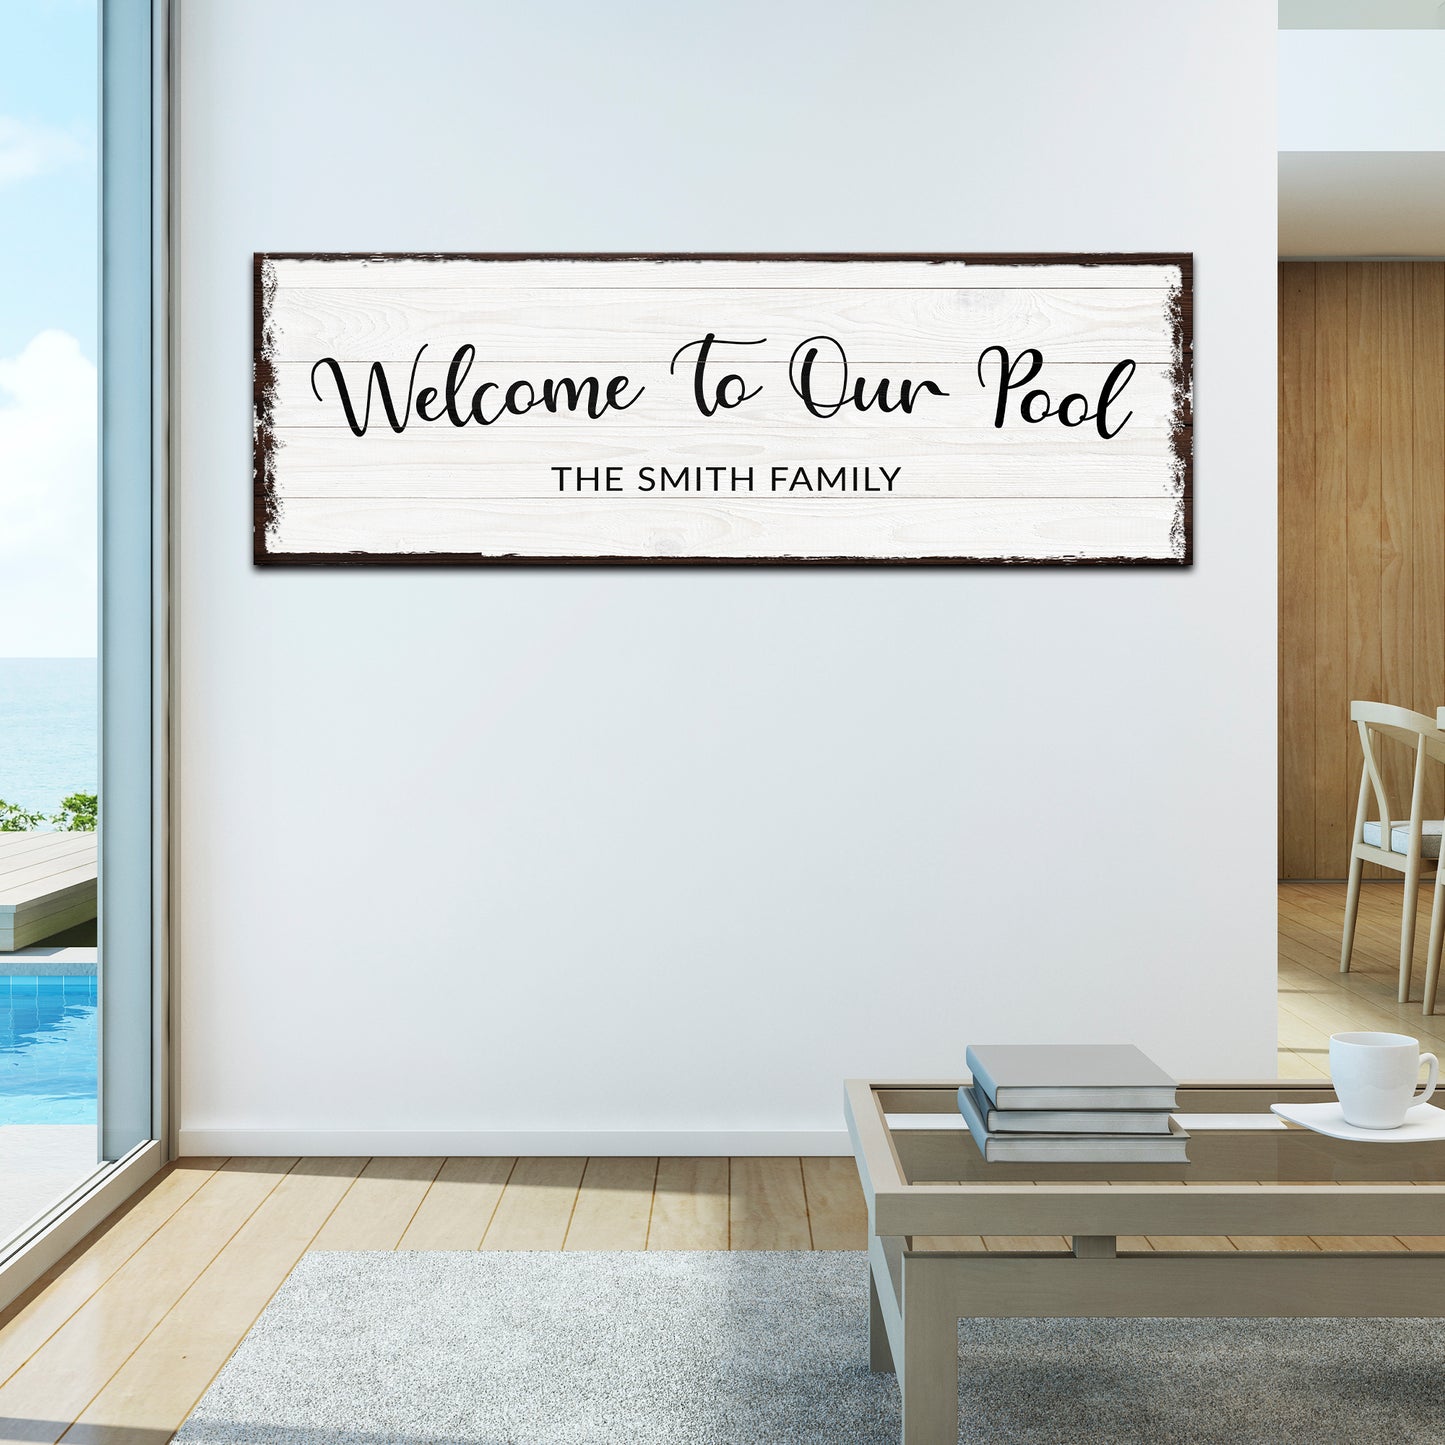 Welcome To Our Pool Sign Style 1 - Image by Tailored Canvases